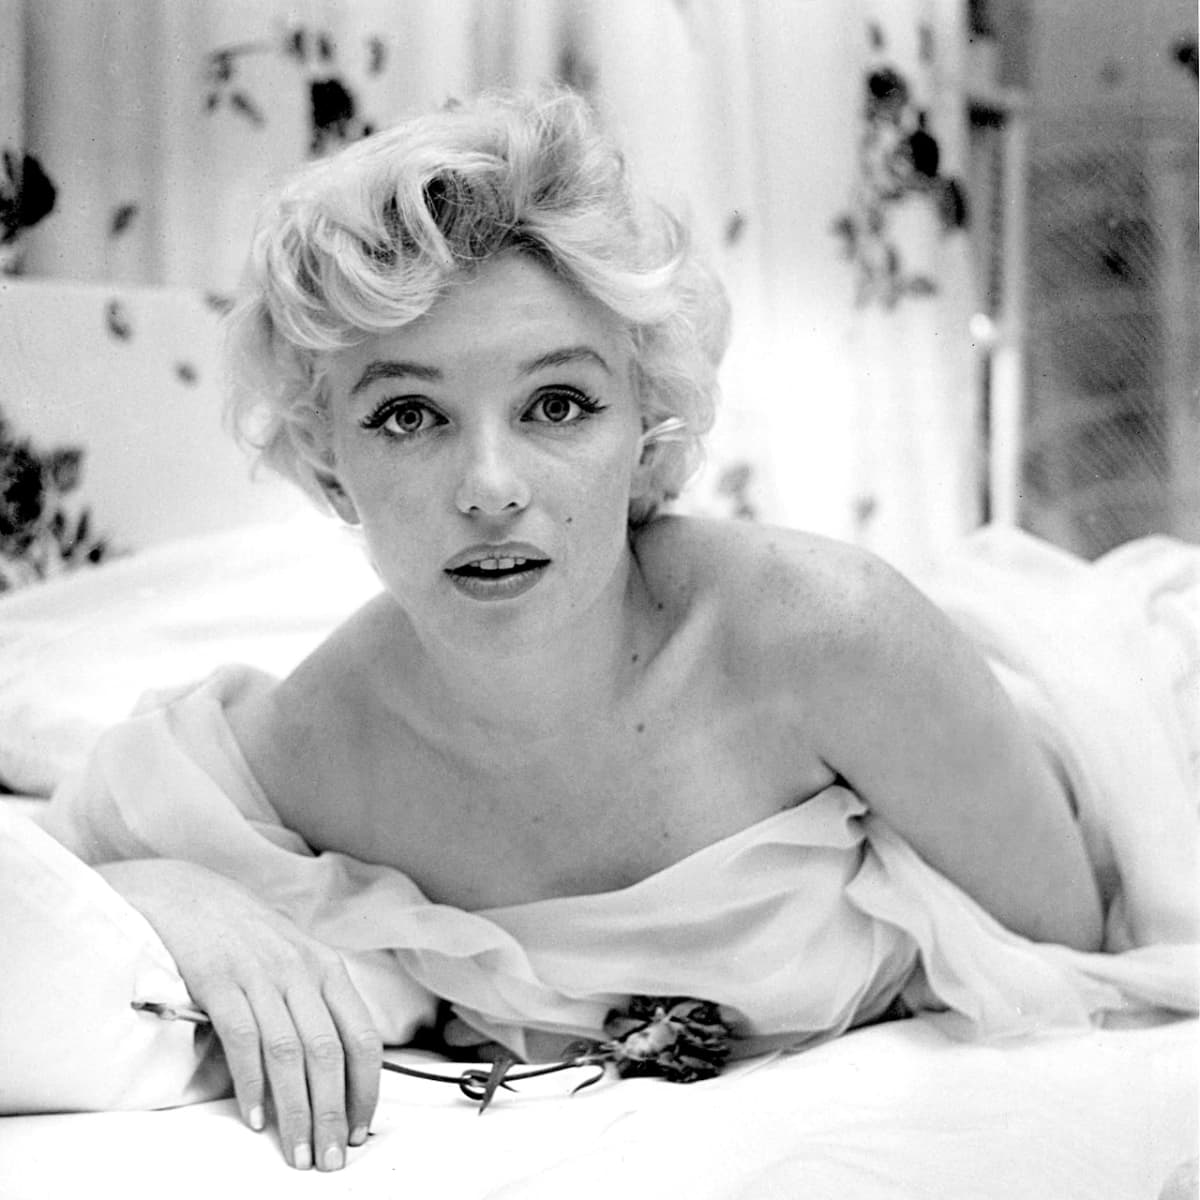 Was Marilyn Monroe the first female superstar to be photographed